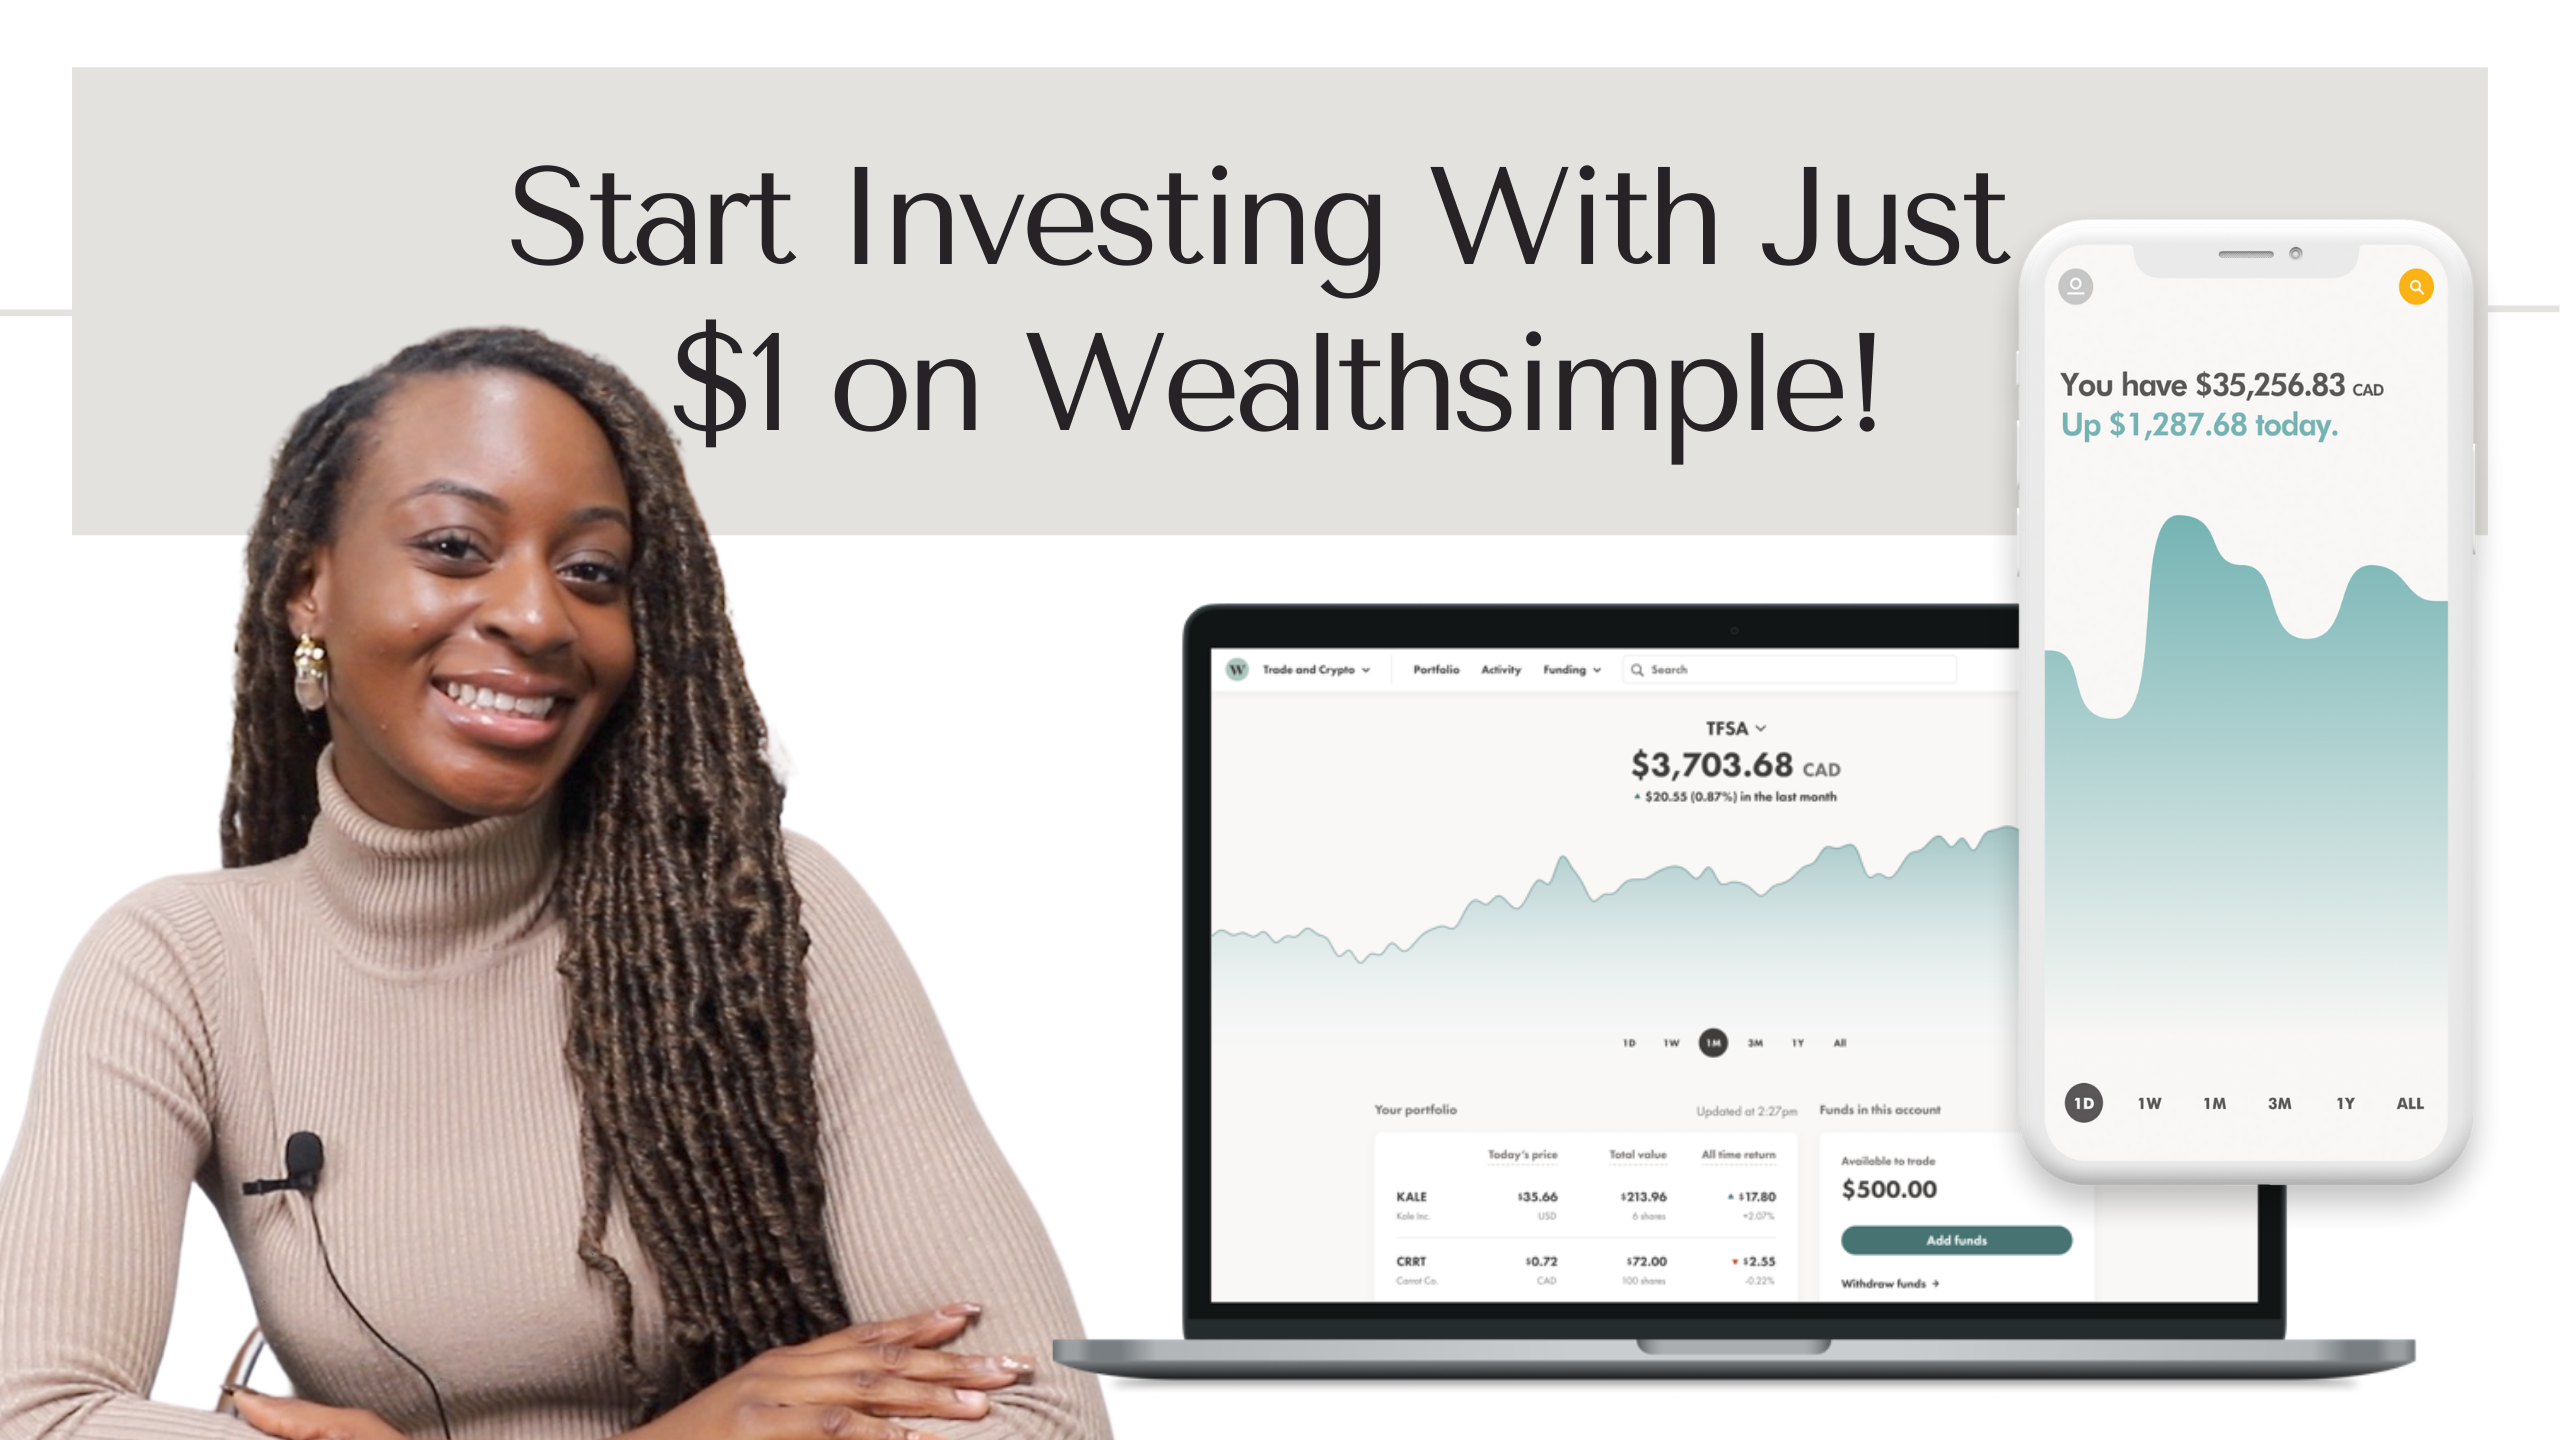 Start investing with just $1 with Wealthsimple